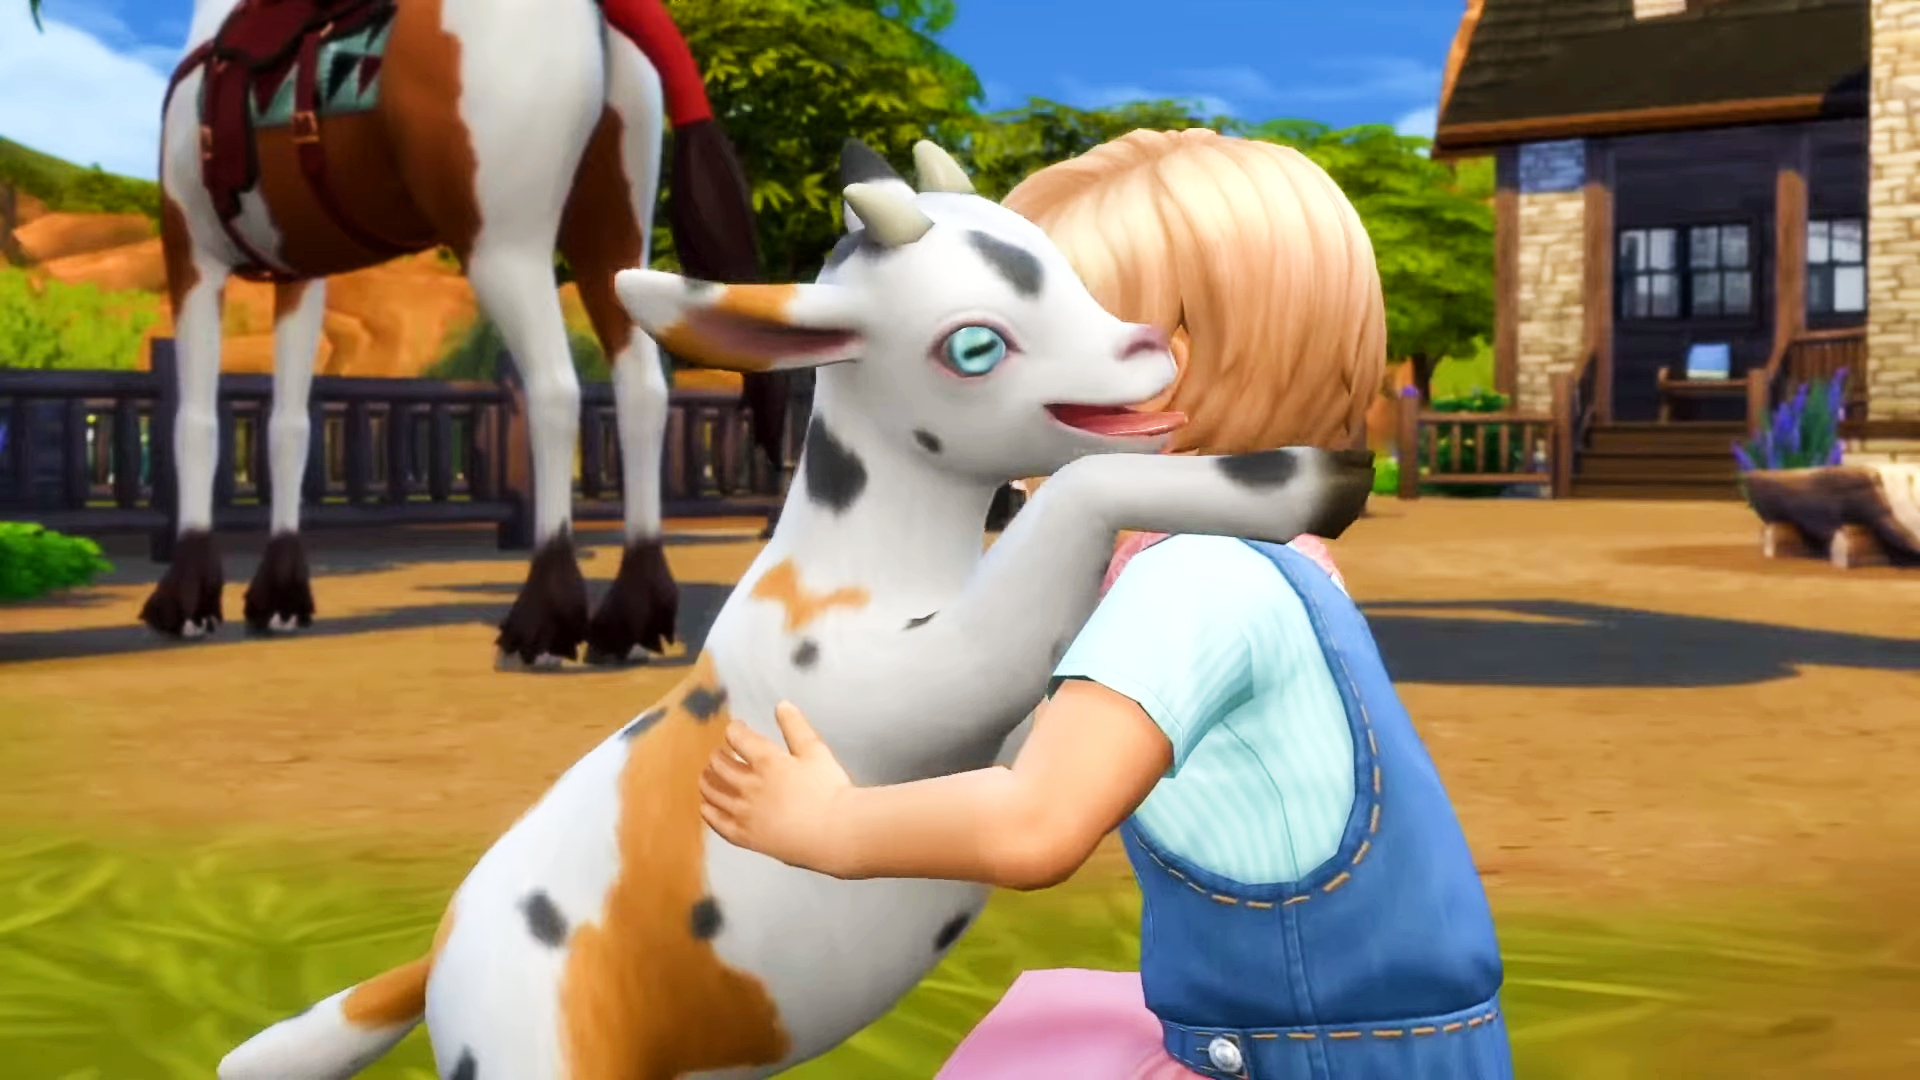 The Sims 4 Horse Ranch confirms release date, and I'm shouting yee-haw